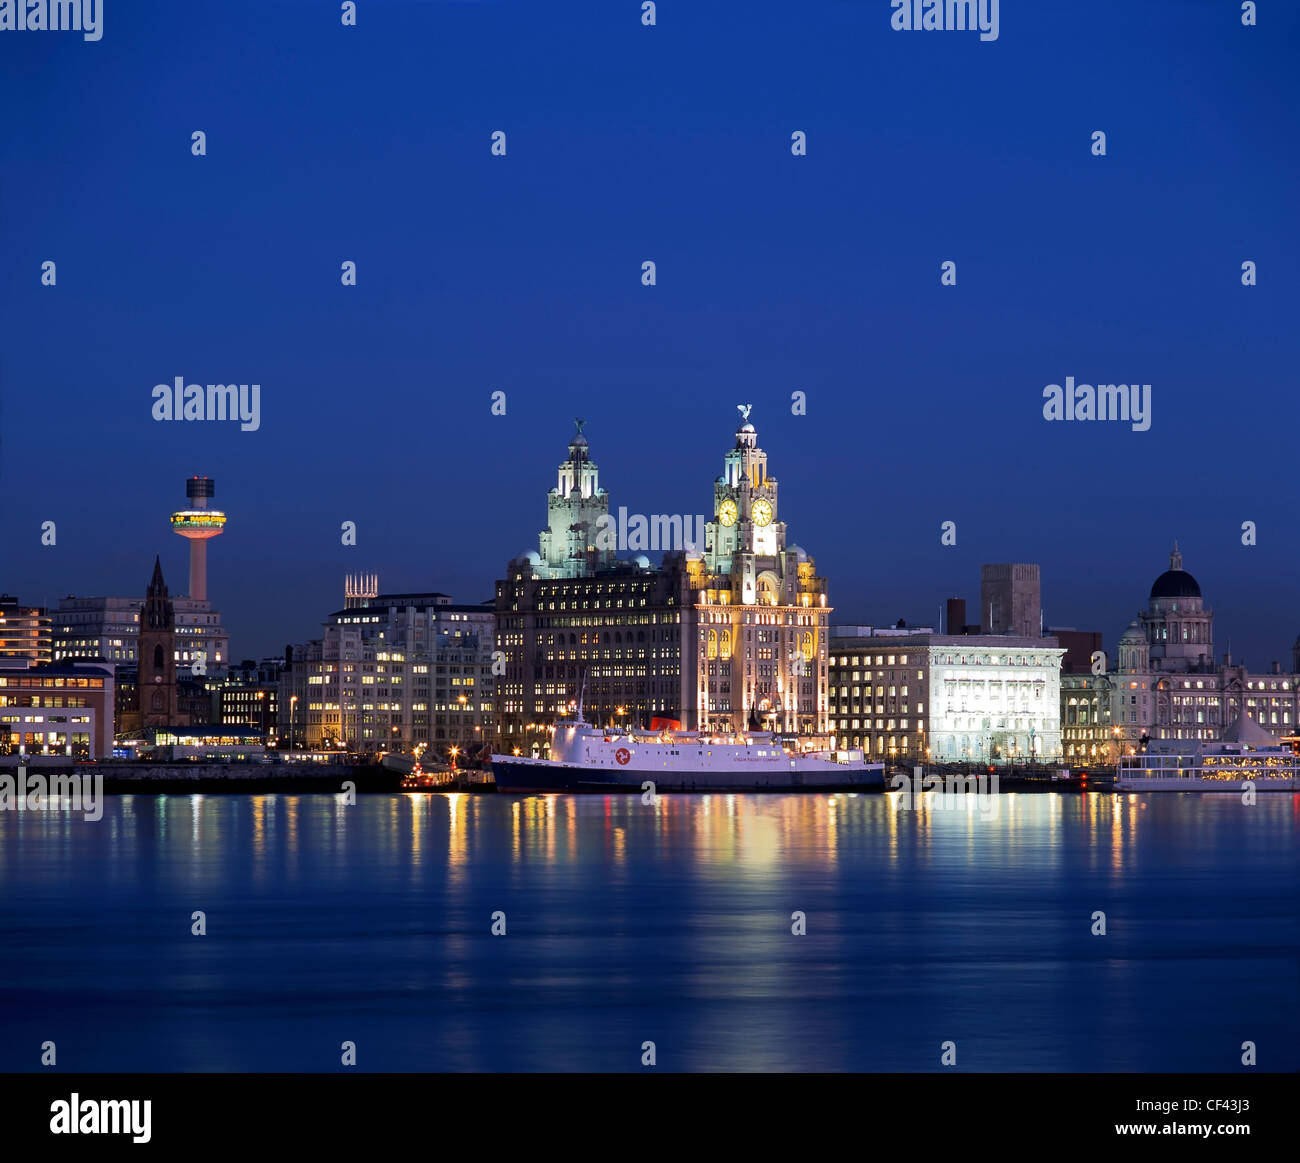 View across the River Mersey of the famous Liverpool waterfront at Stock Photo ...1300 x 1163